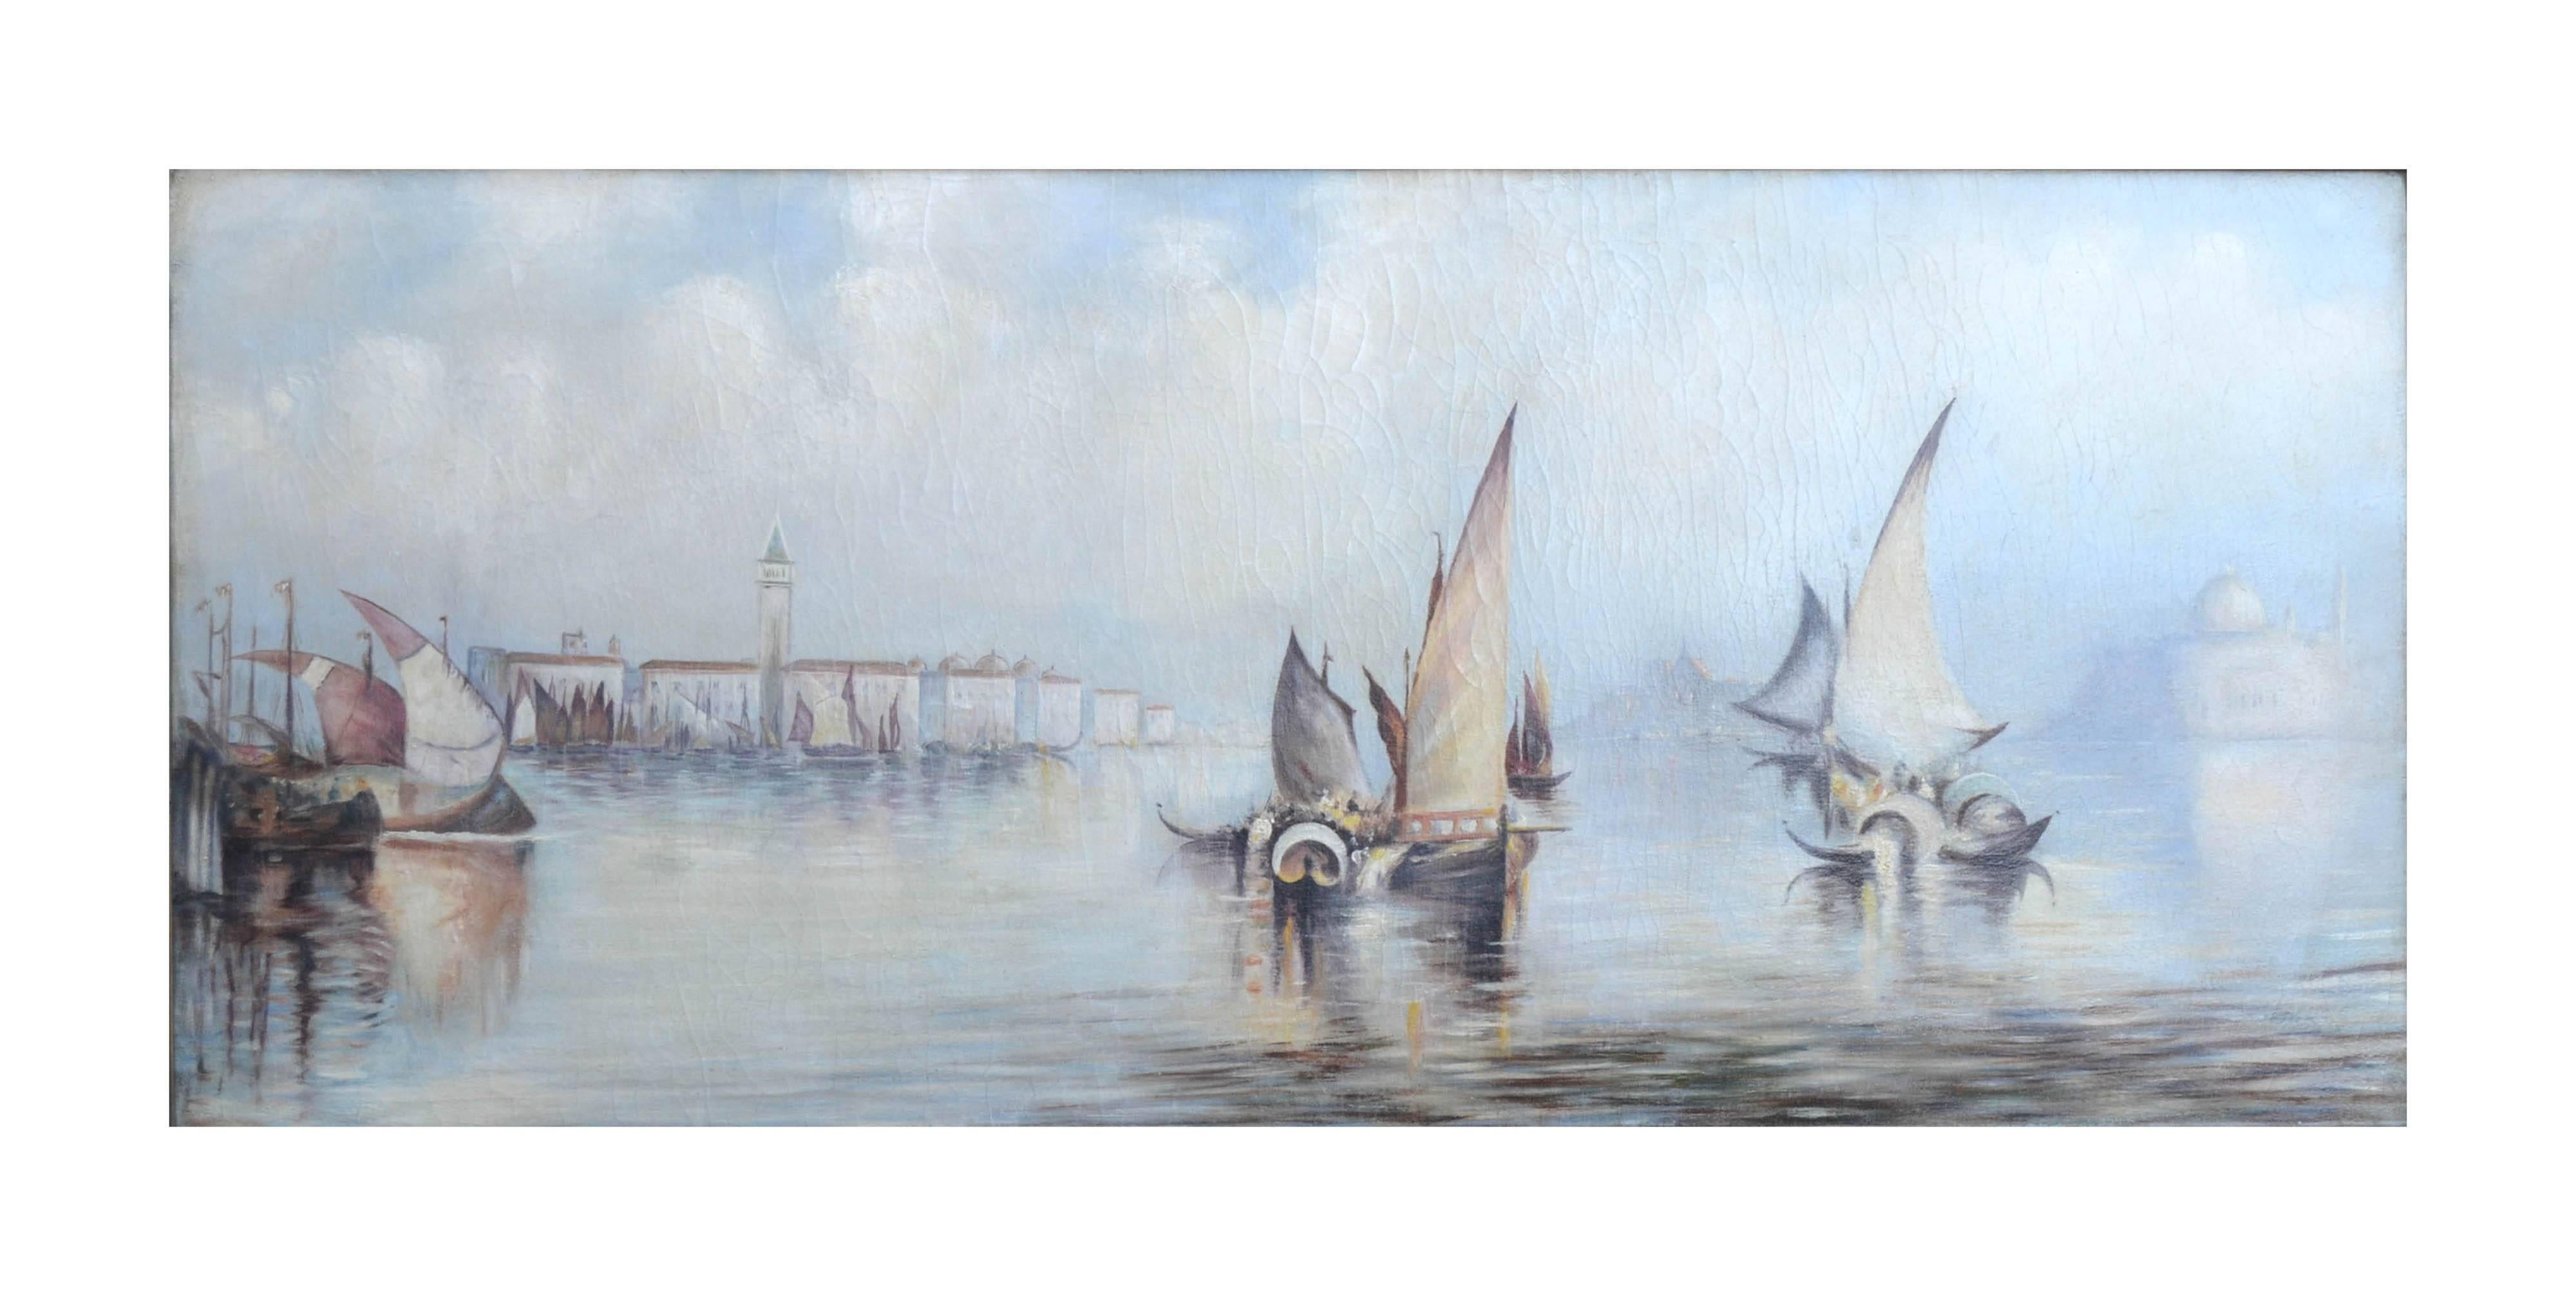 1920's Boats on the Nile Landscape - Painting by Unknown